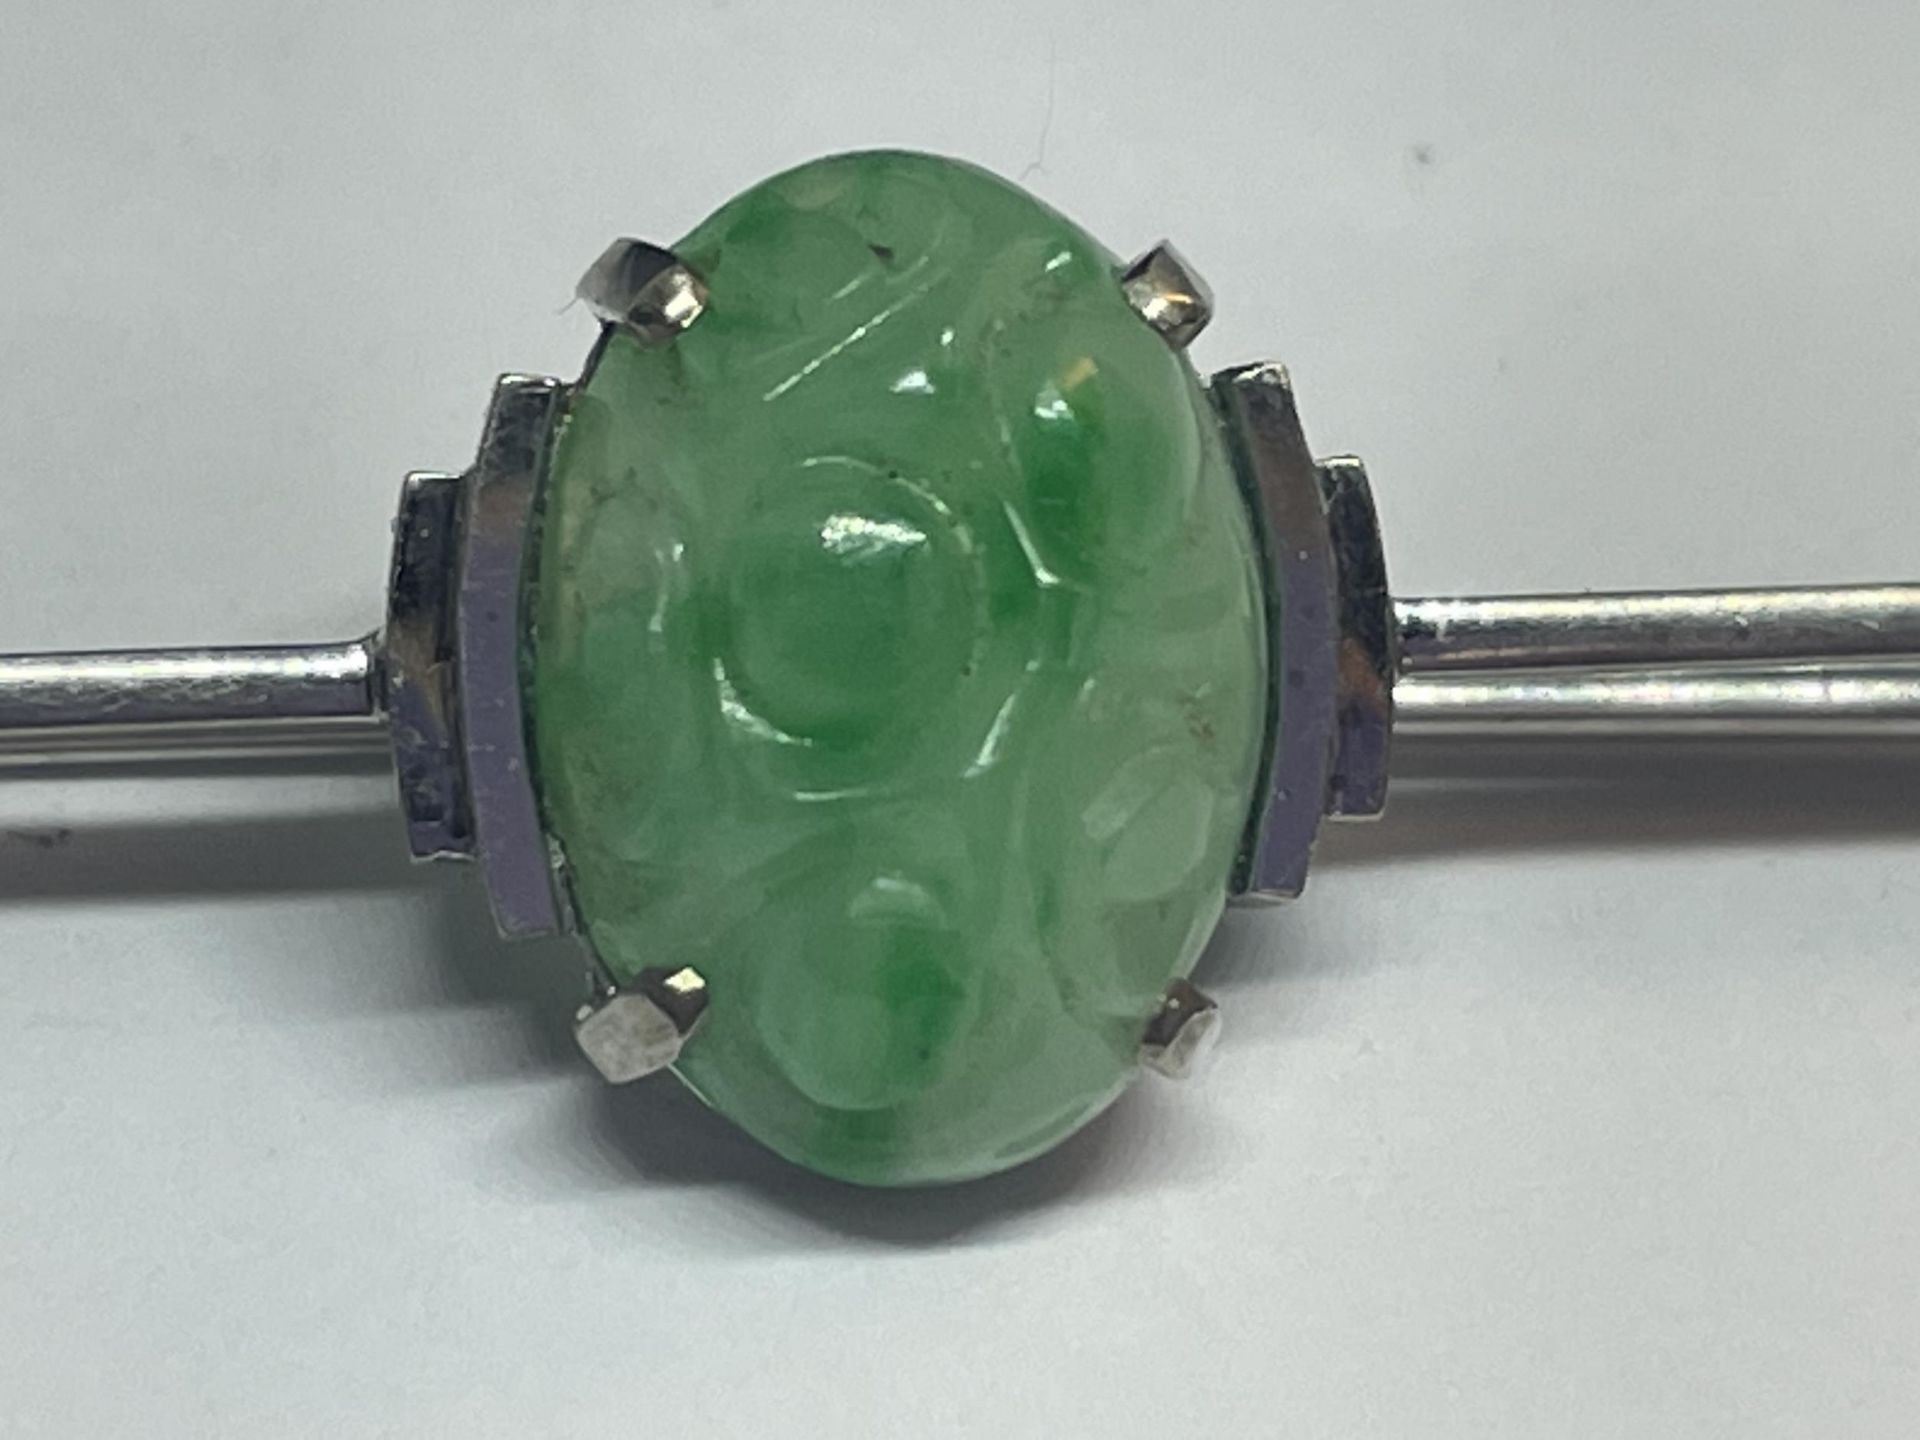 A 9 CARAT WHITE GOLD BROOCH WITH A CENTRE JADE STONE GROSS WEIGHT 3.7 GRAMS IN A PRESENTATION BOX - Image 2 of 4